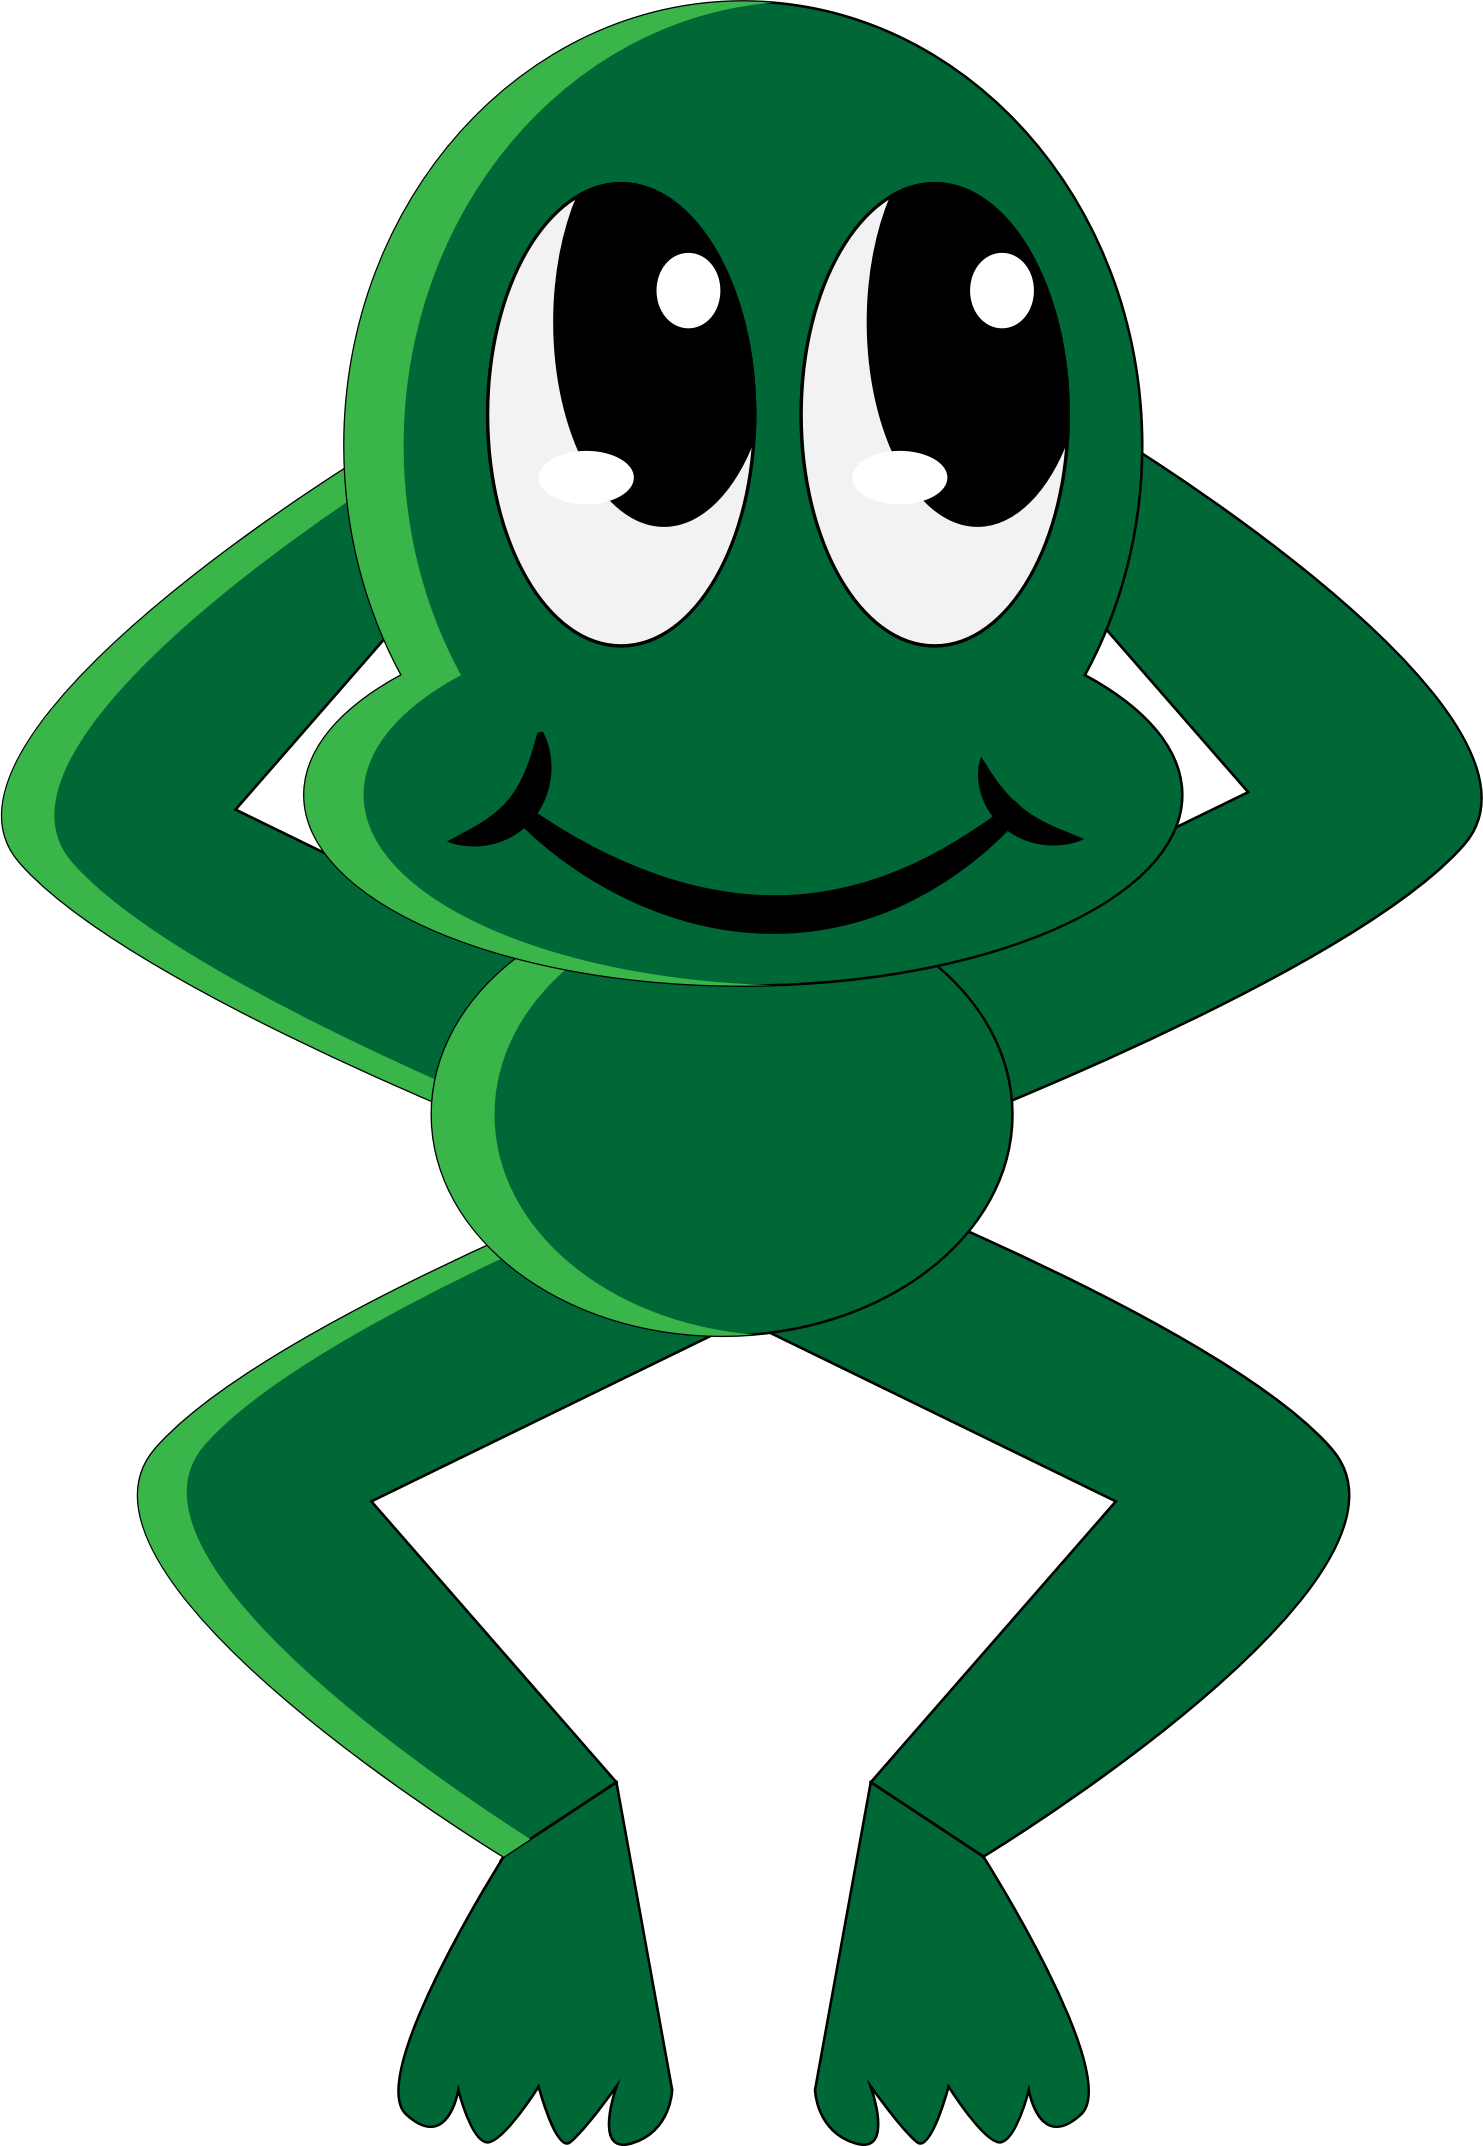 A Cartoon Frog With Arms Behind Head